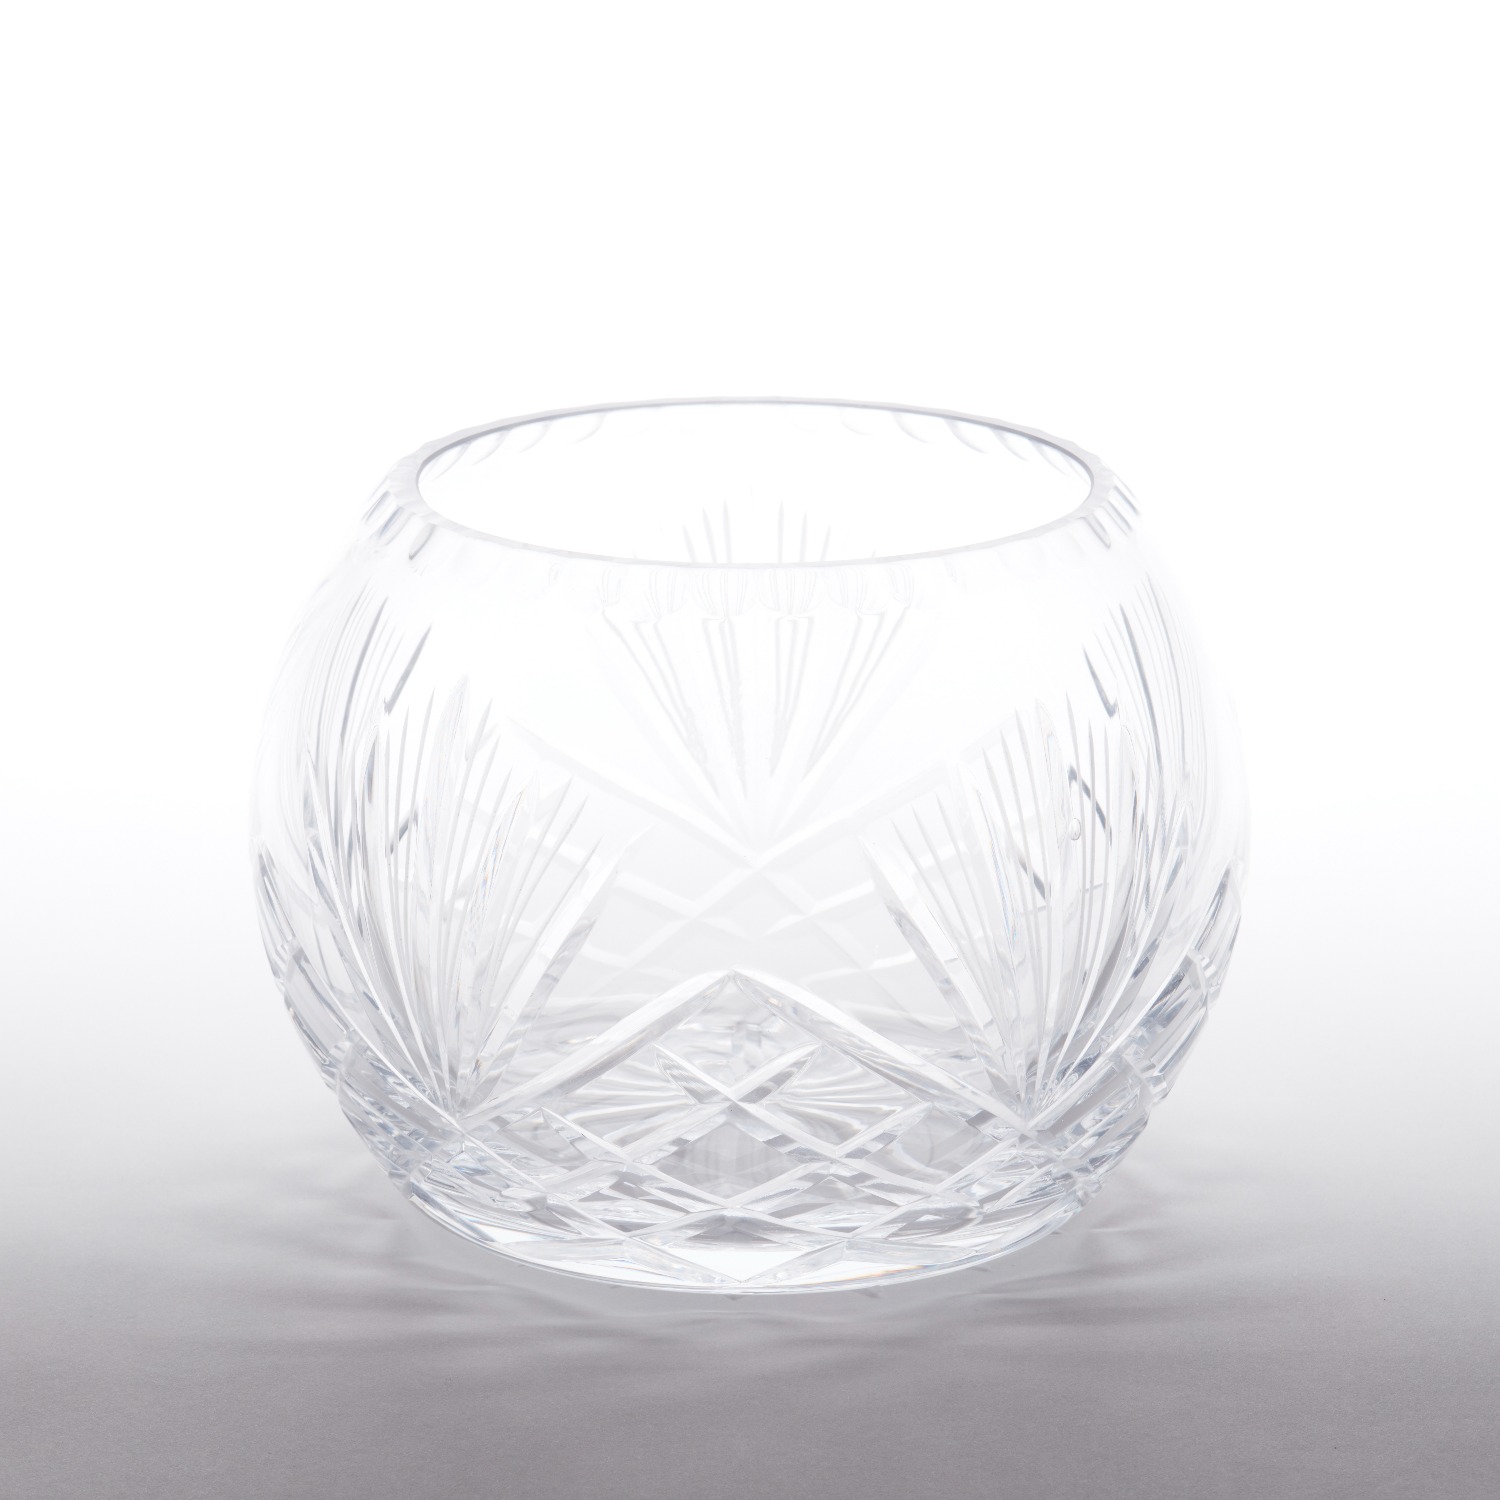 Glass, Mixing Bowl; faceted lip  For Rent in North Hollywood